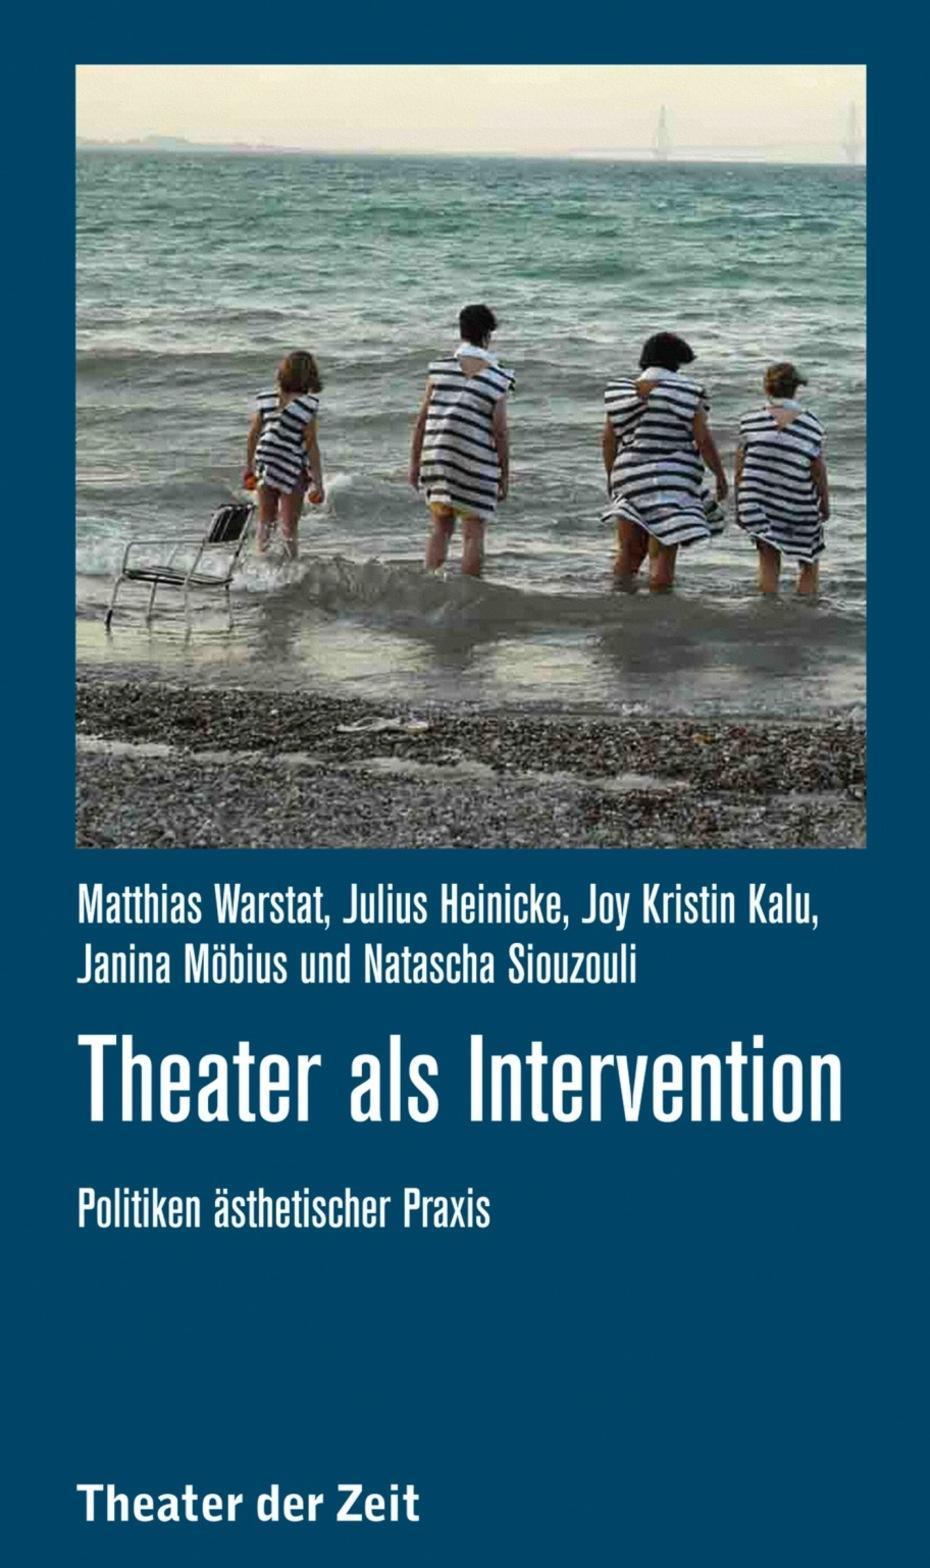 Theater als Intervention (Cover)